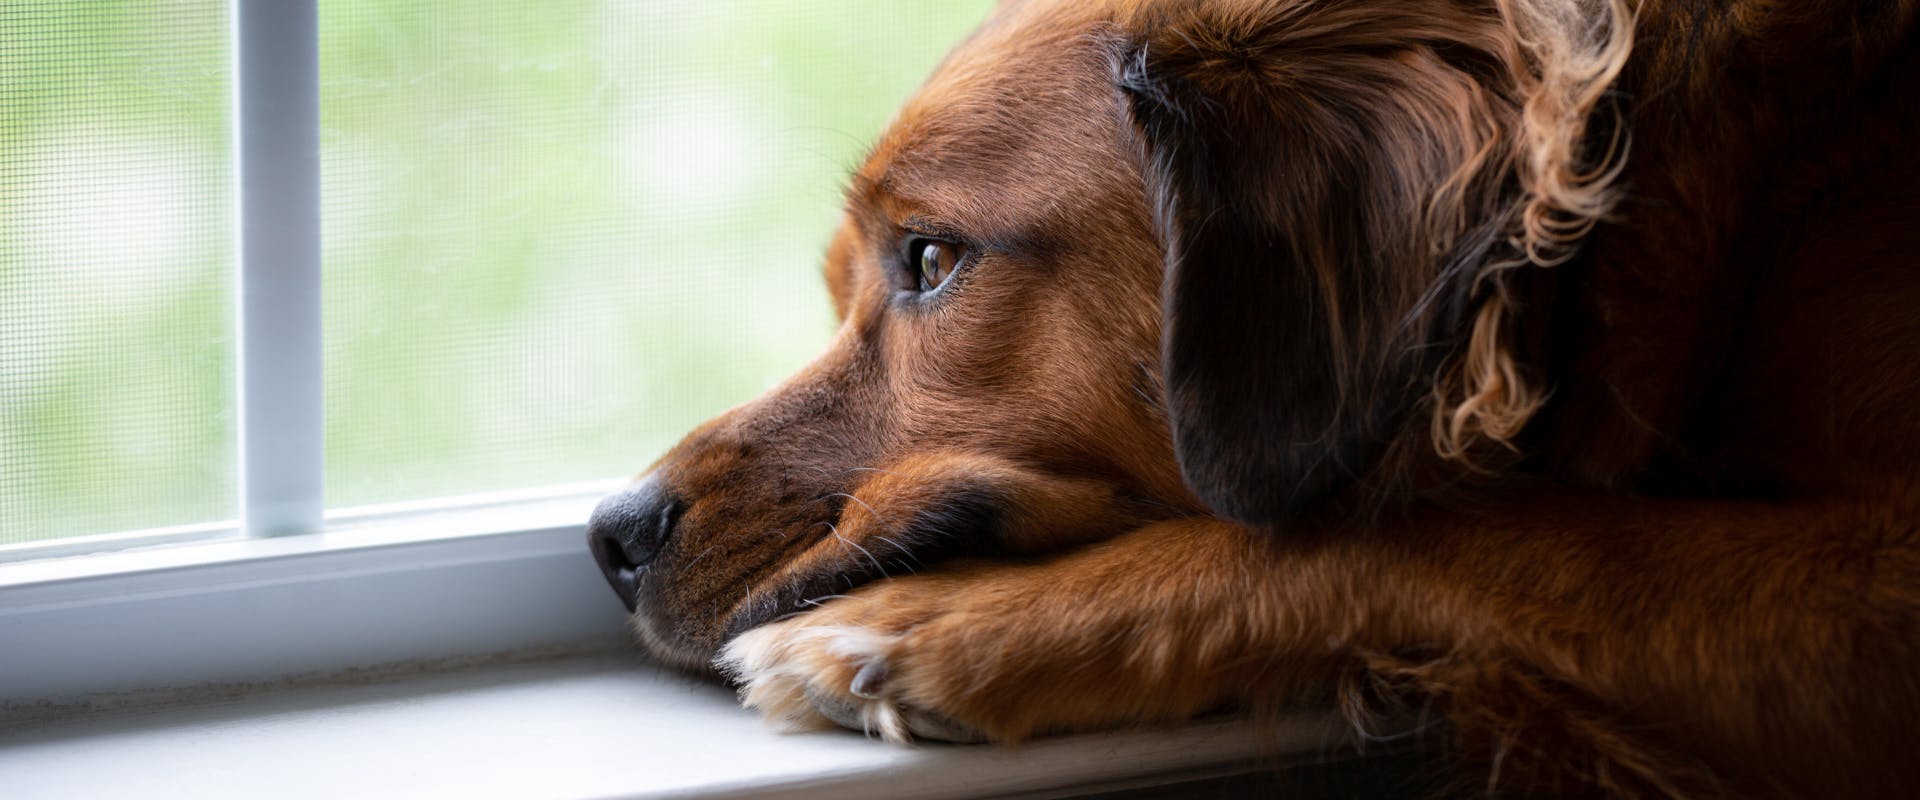 A dog stares out the window.